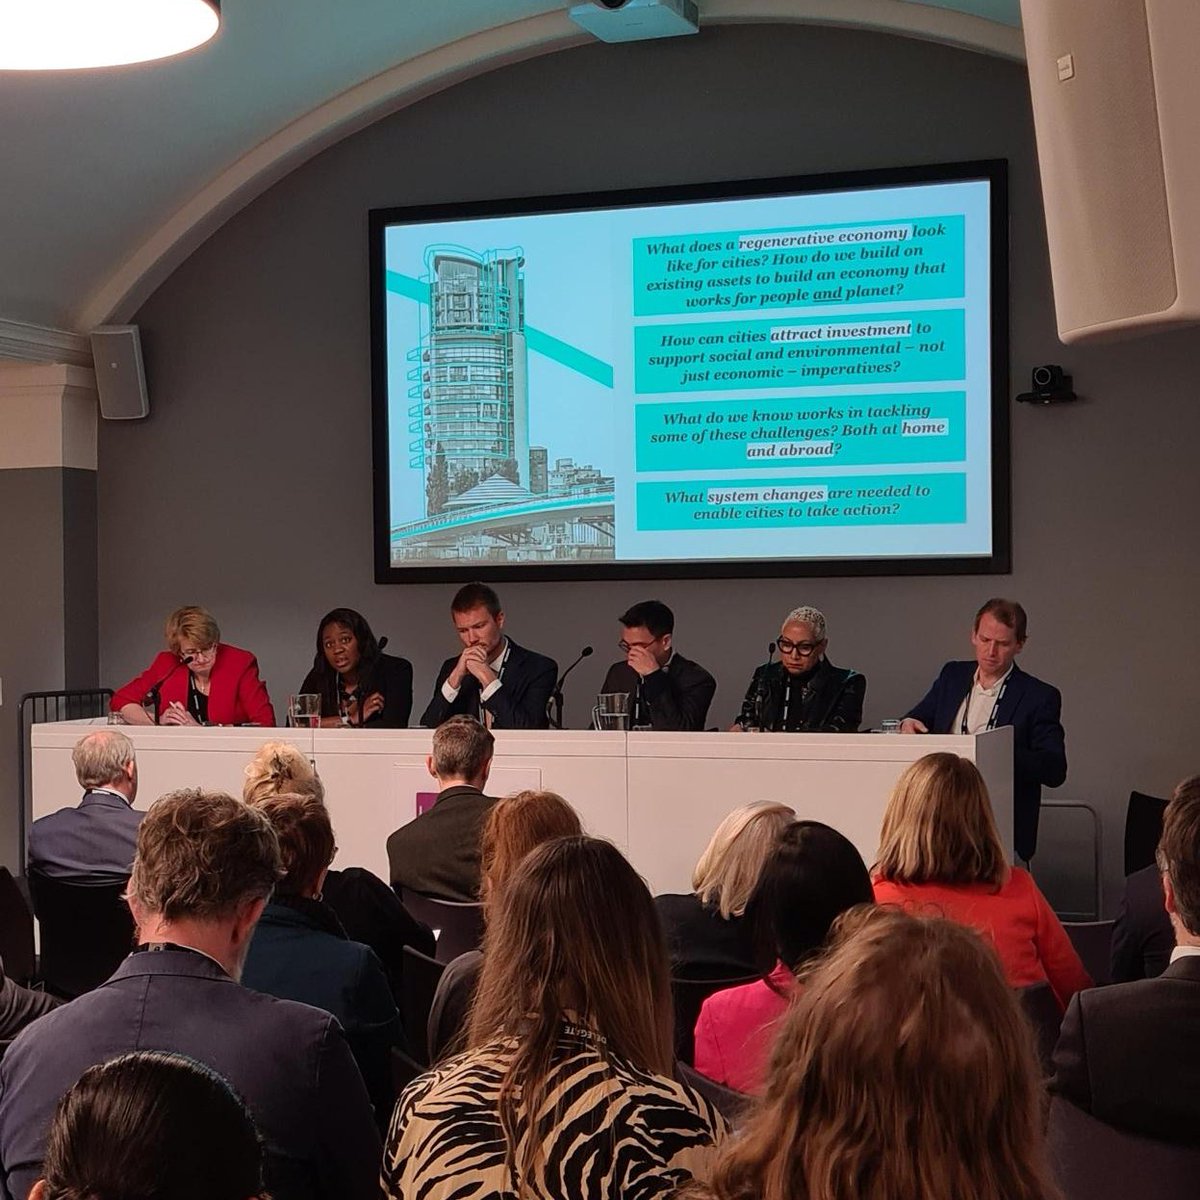 #UrbanSummit23 @LGALocalism: Panelists @SHinchcliffe, @Miatsf, @ahawksbee, @JWmusesthis, @Willgarton1 and Lord @NatWei are currently discussing and commenting on our #UKUrbanFutures commission.